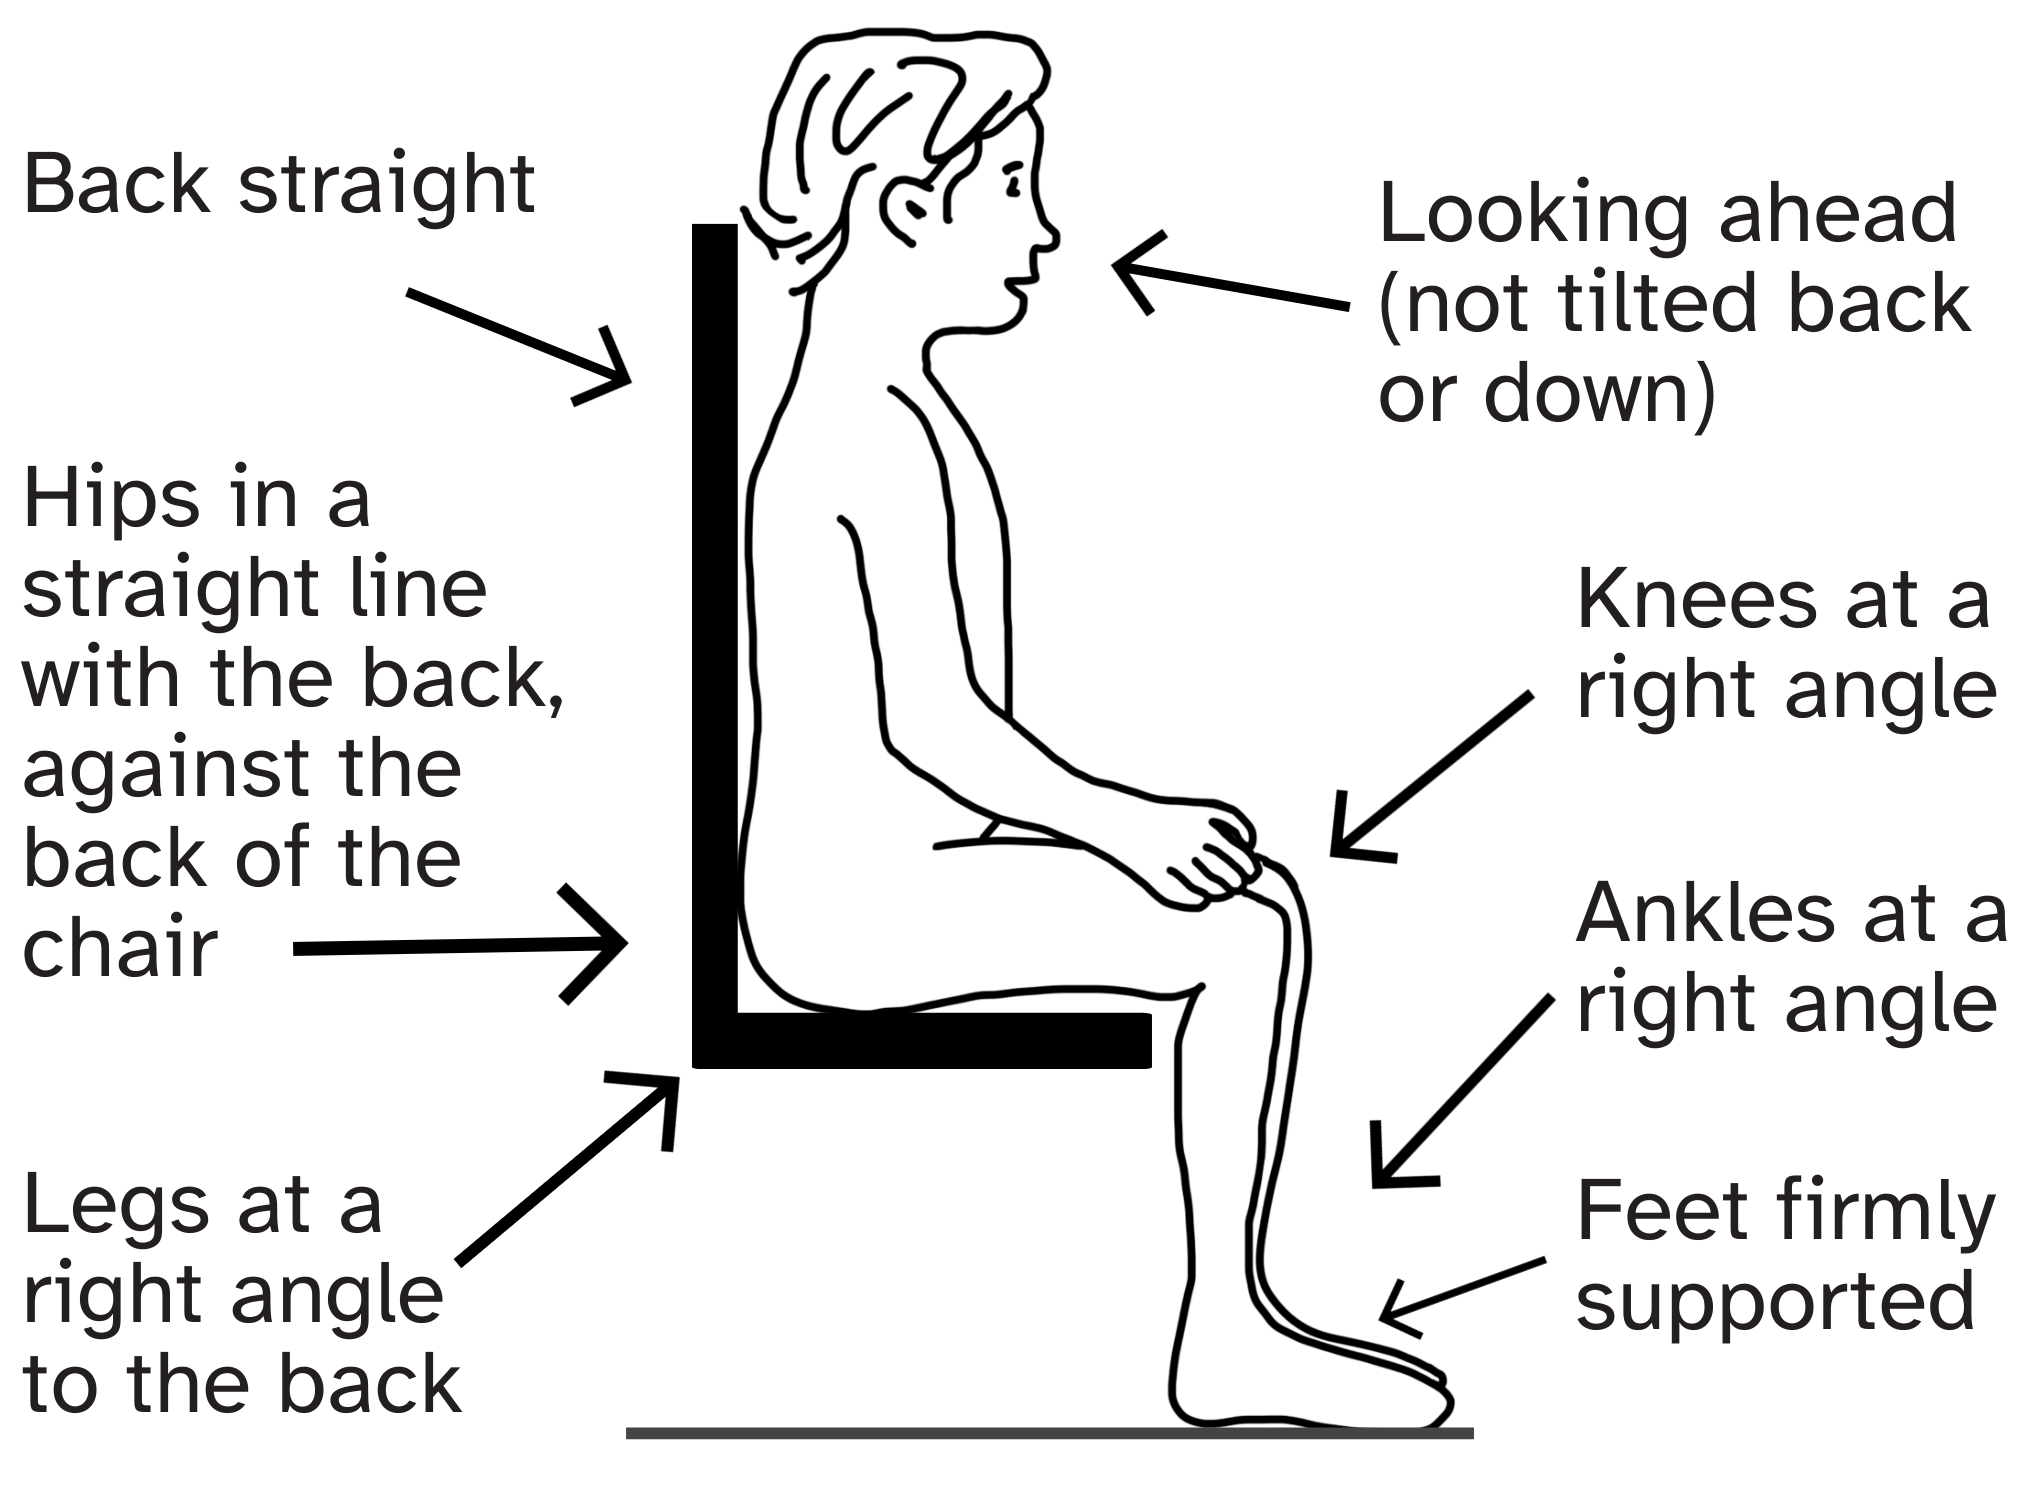 Child sitting on chair with back straight, looking ahead, hips in straight line with the back against the back of the chair, legs at a right angle to the back, knees and ankles at a right angle and feet firmly supported